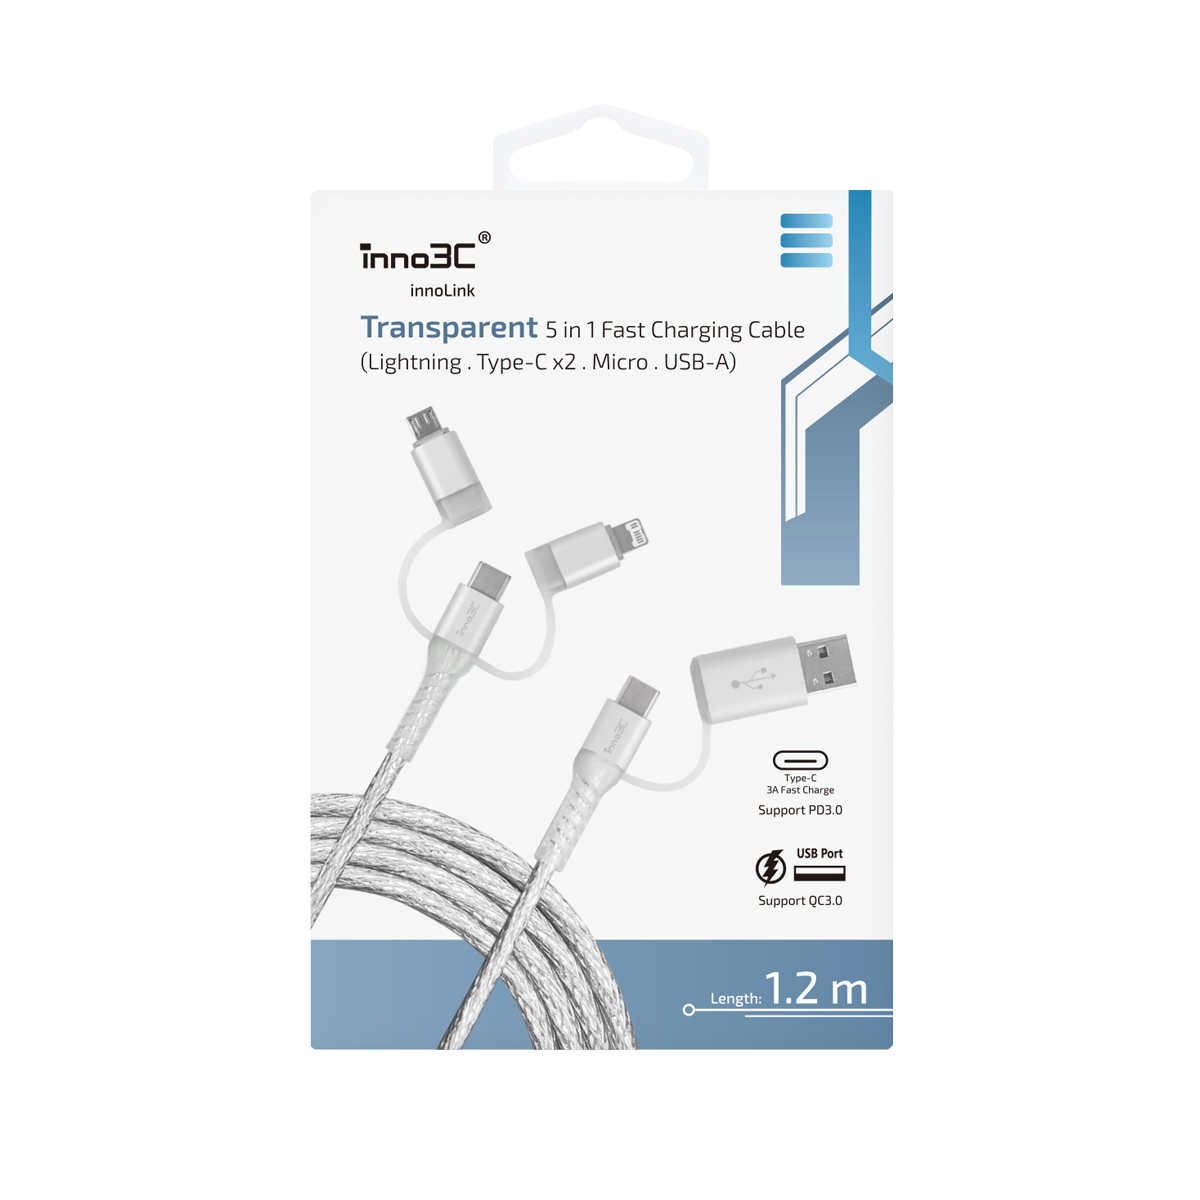 inno3C i-5CS-12  5 in 1 Lightning/Type-C/Micro toUSB/Type-C Cable (Transparent Silver), , large image number 4